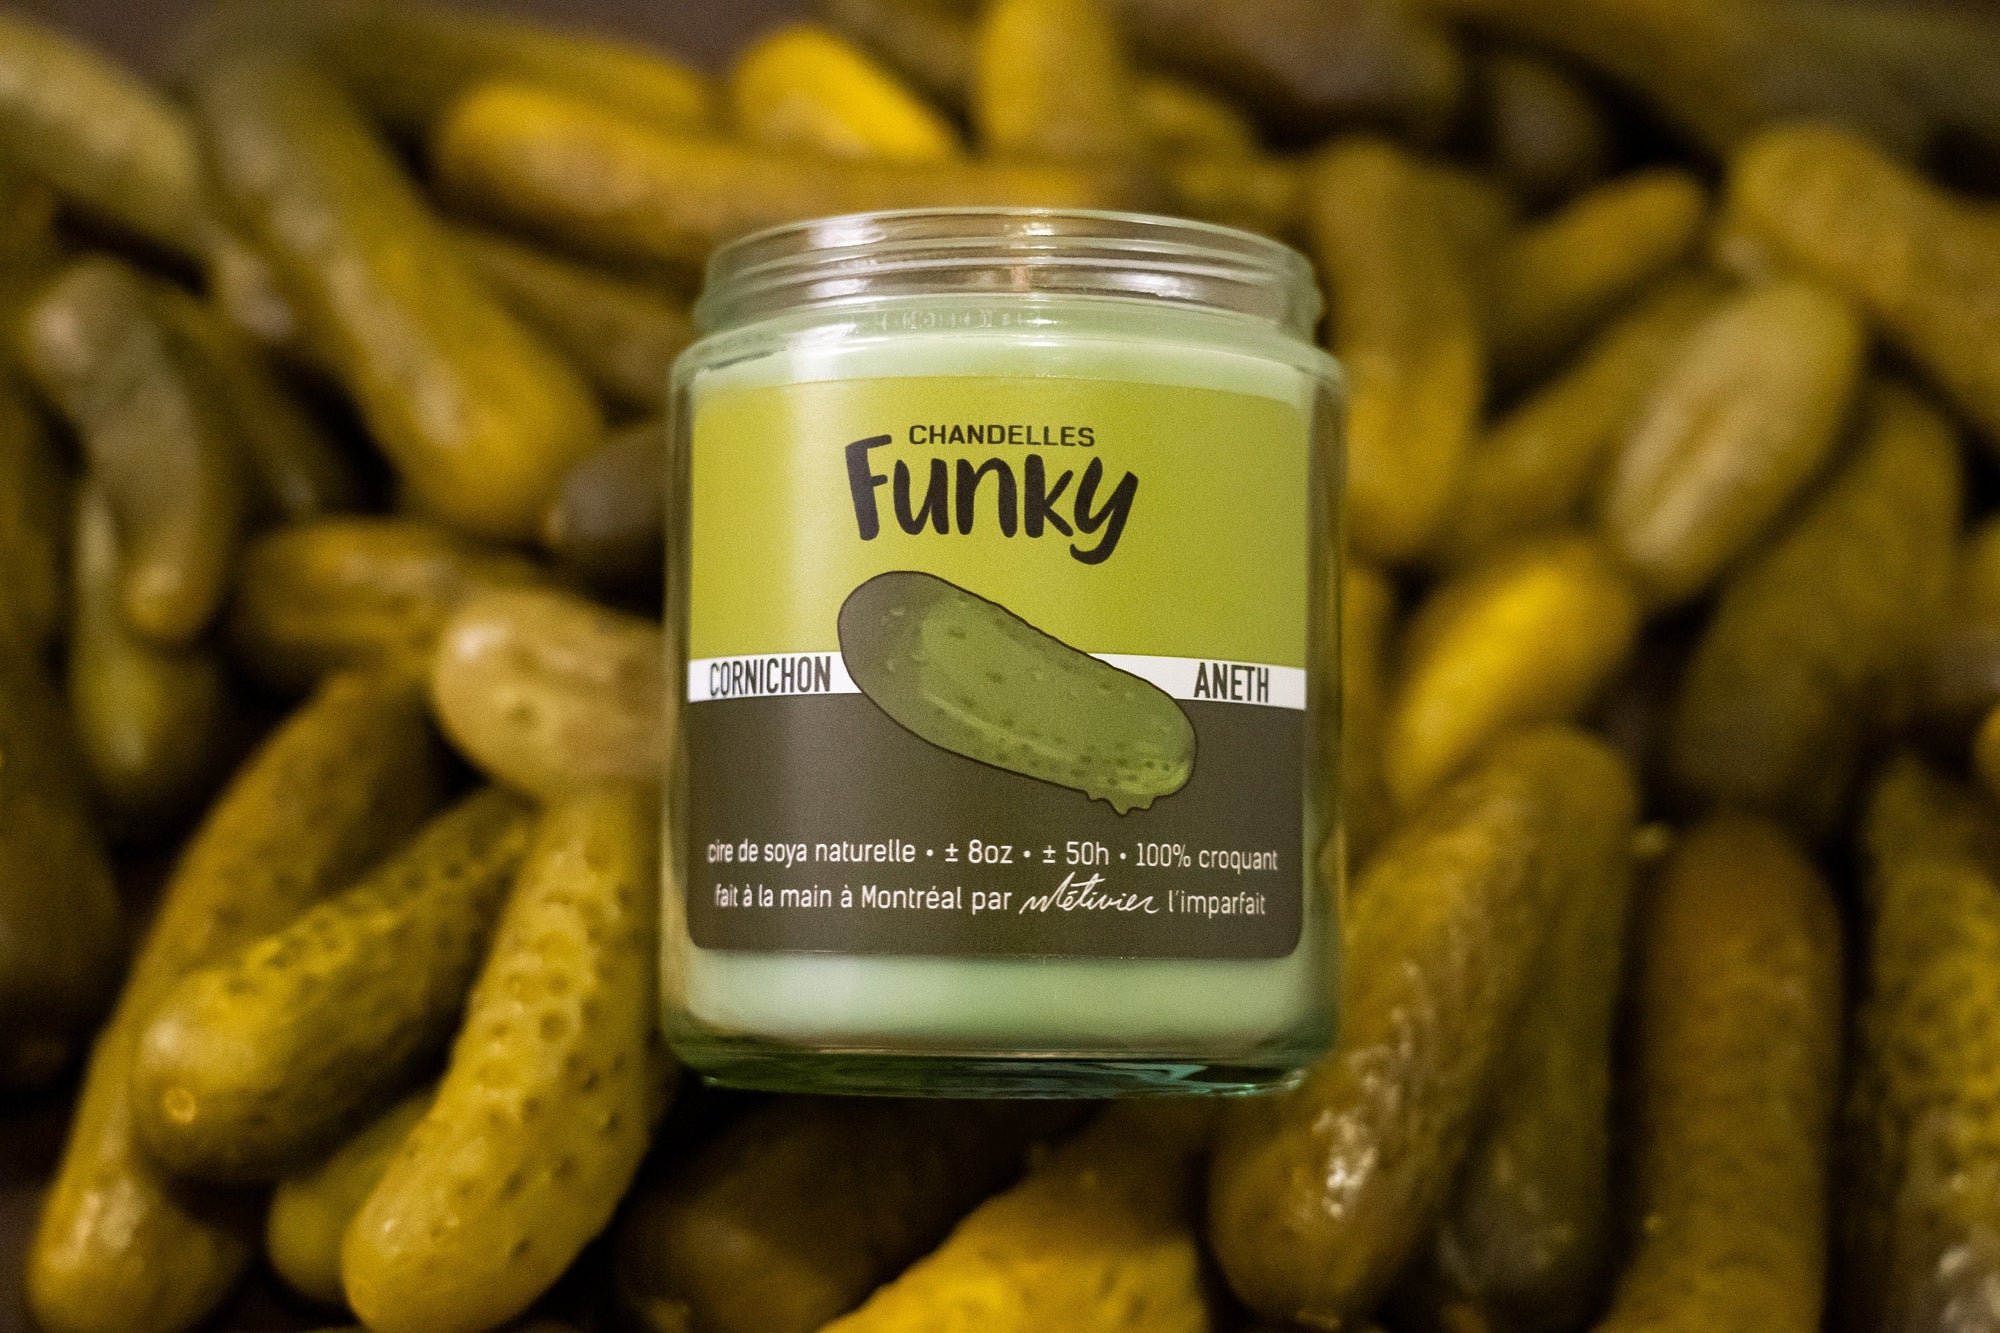 Chandelle Cornichon Aneth - Dill pickle - Funky - Funky & Co.